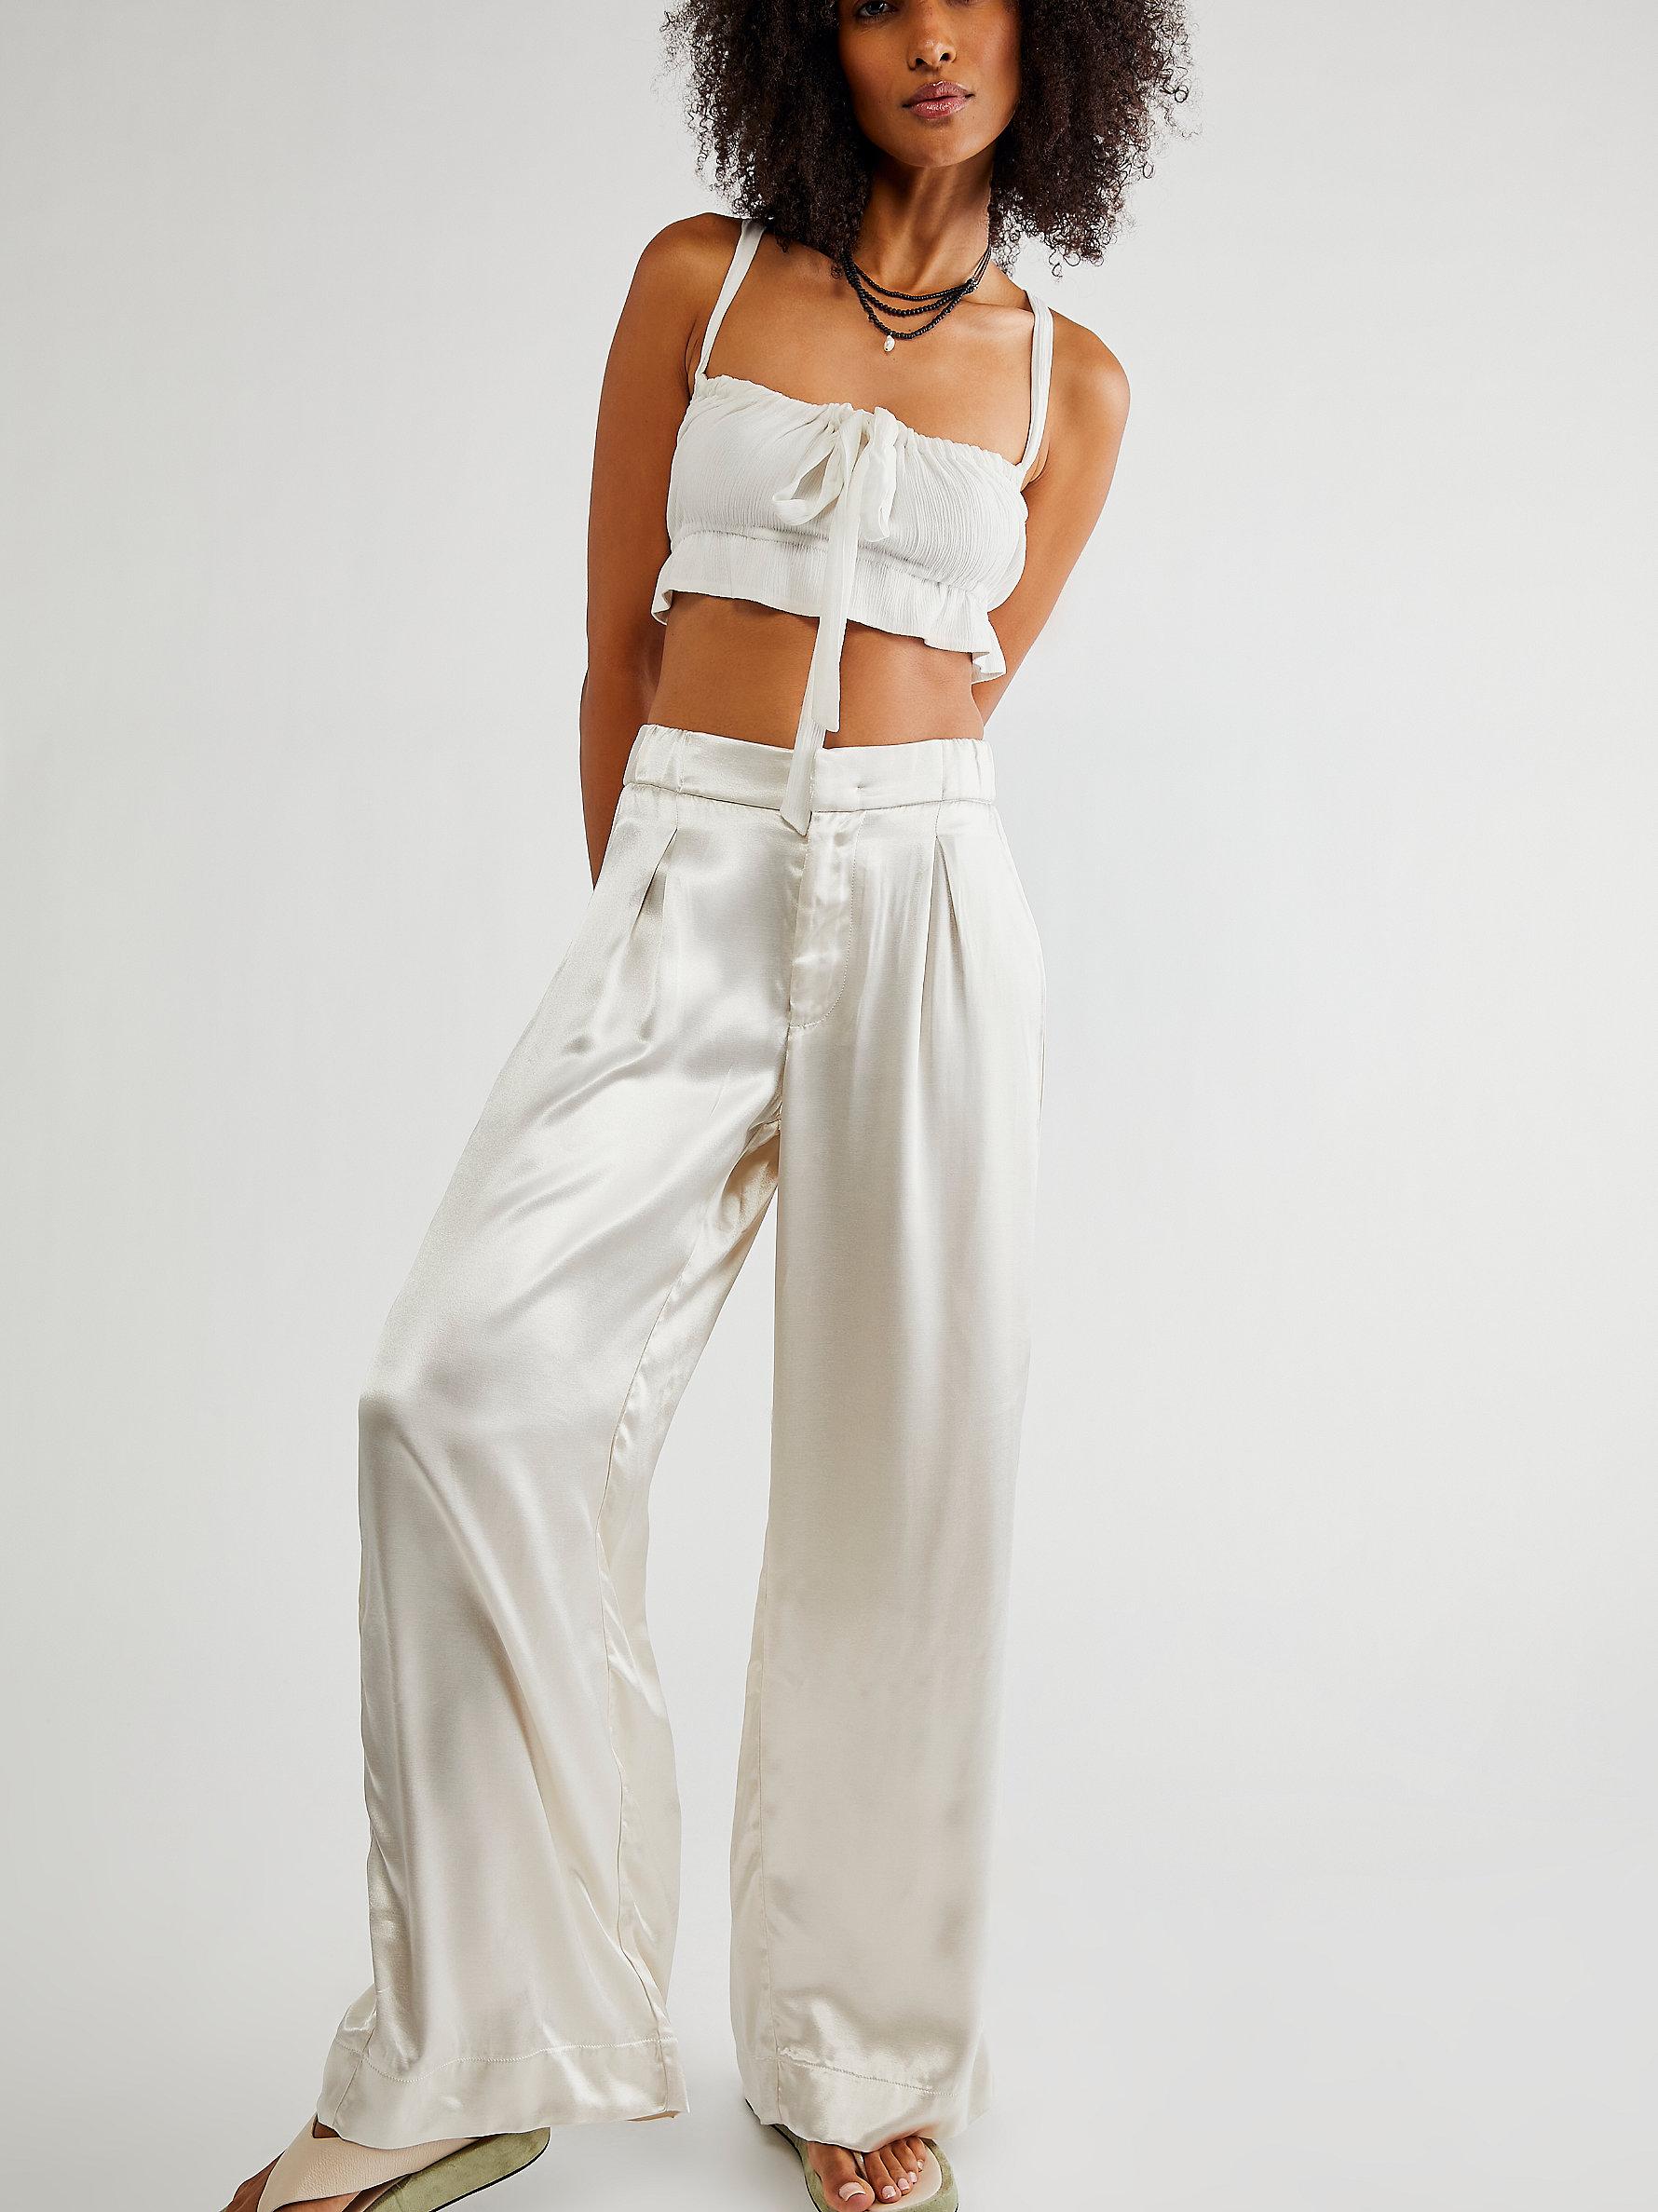 Jeans & Trousers | Off White Satin Pants | Freeup